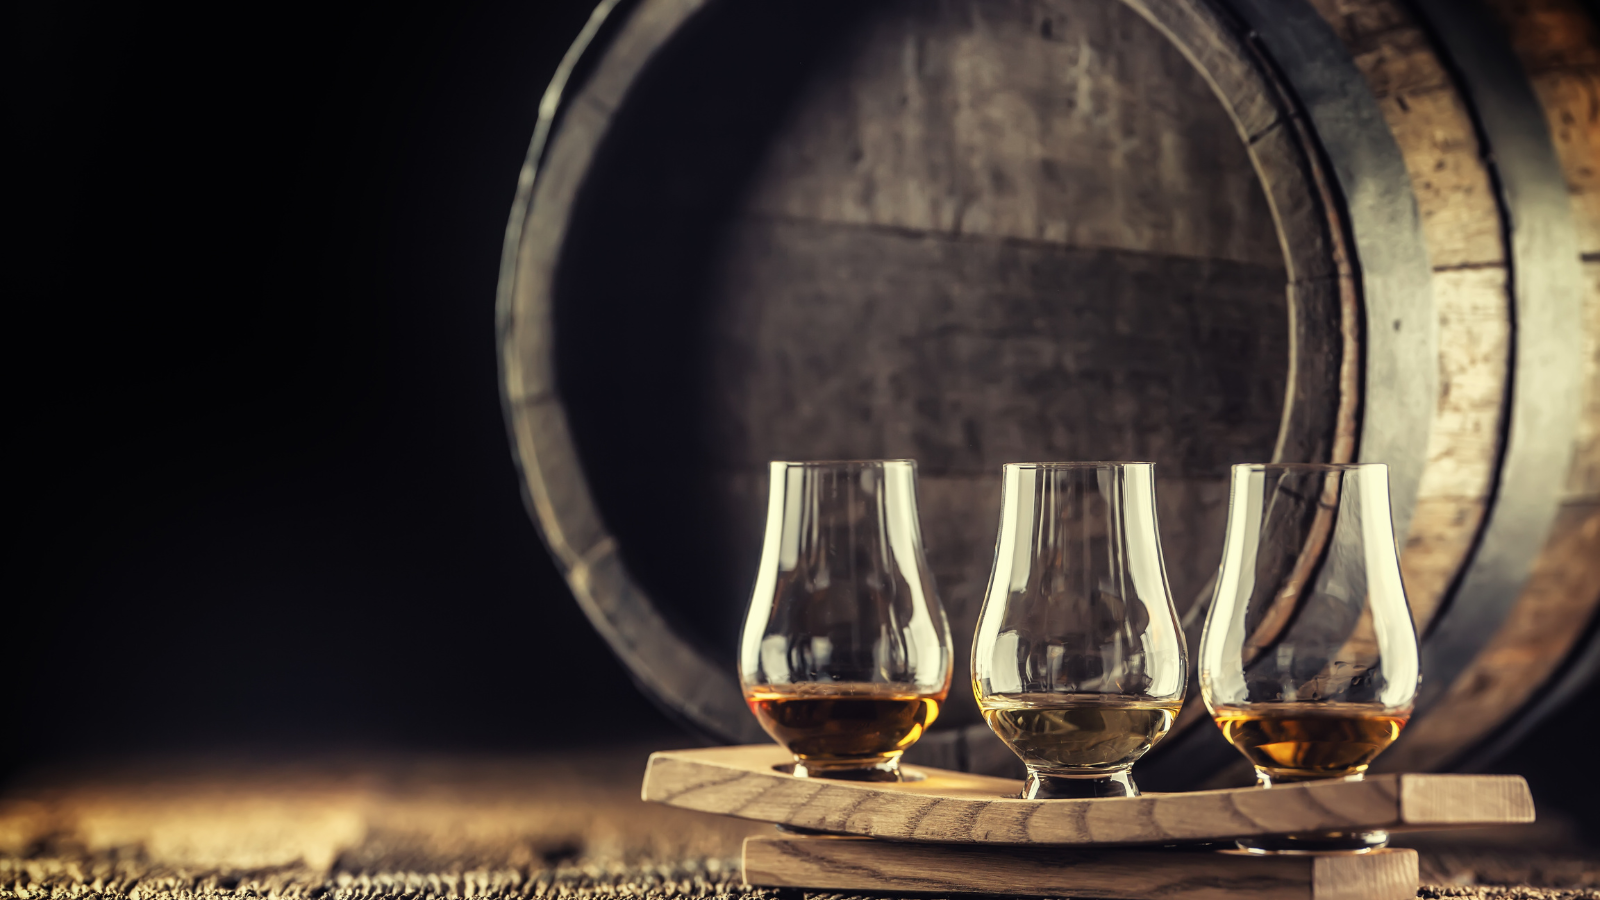 Glasses of whisky and a barrel